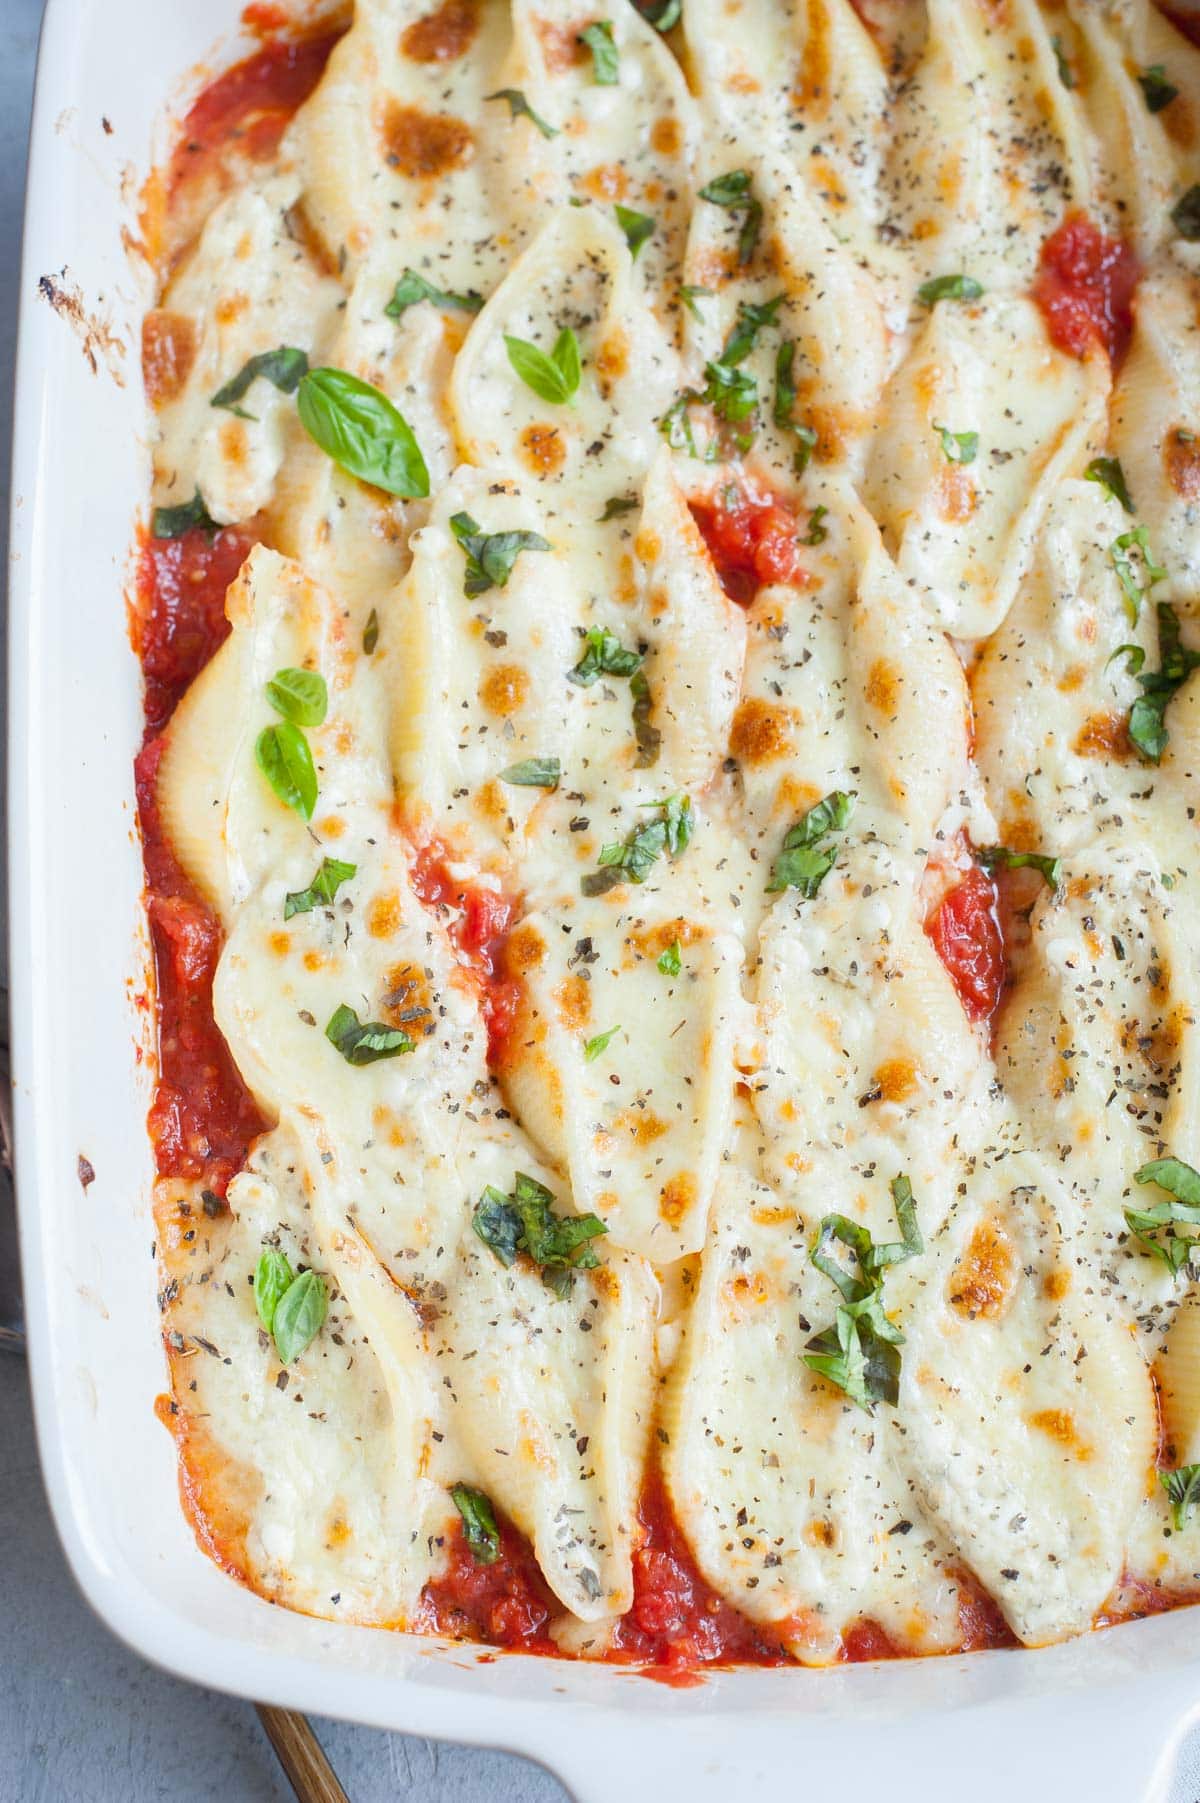 https://www.everyday-delicious.com/wp-content/uploads/2021/08/cottage-cheese-stuffed-shells-everyday-delicious-1.jpg